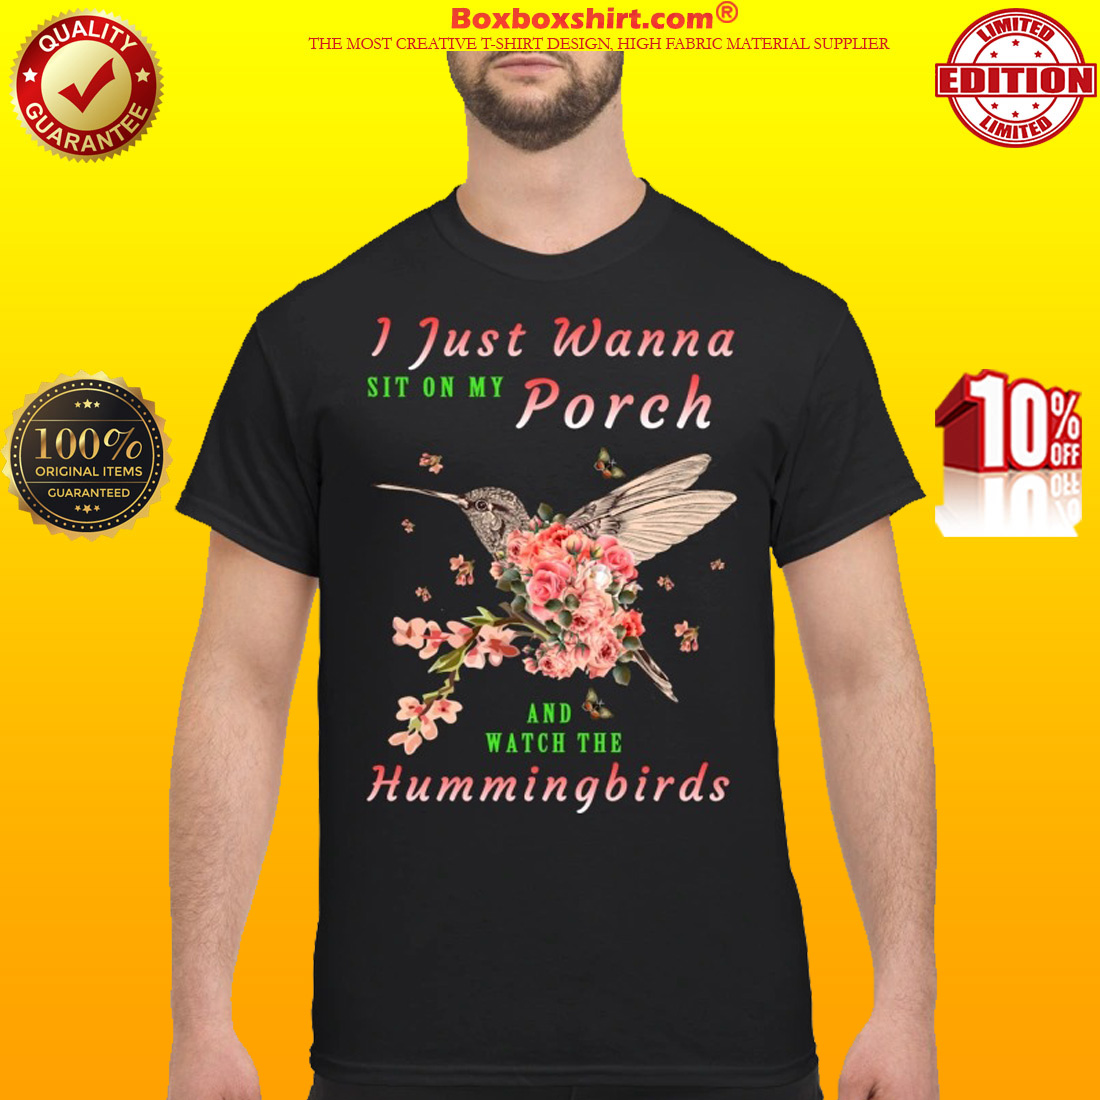 I just wanna sit on Porch and watch the hummingbirds classic shirt